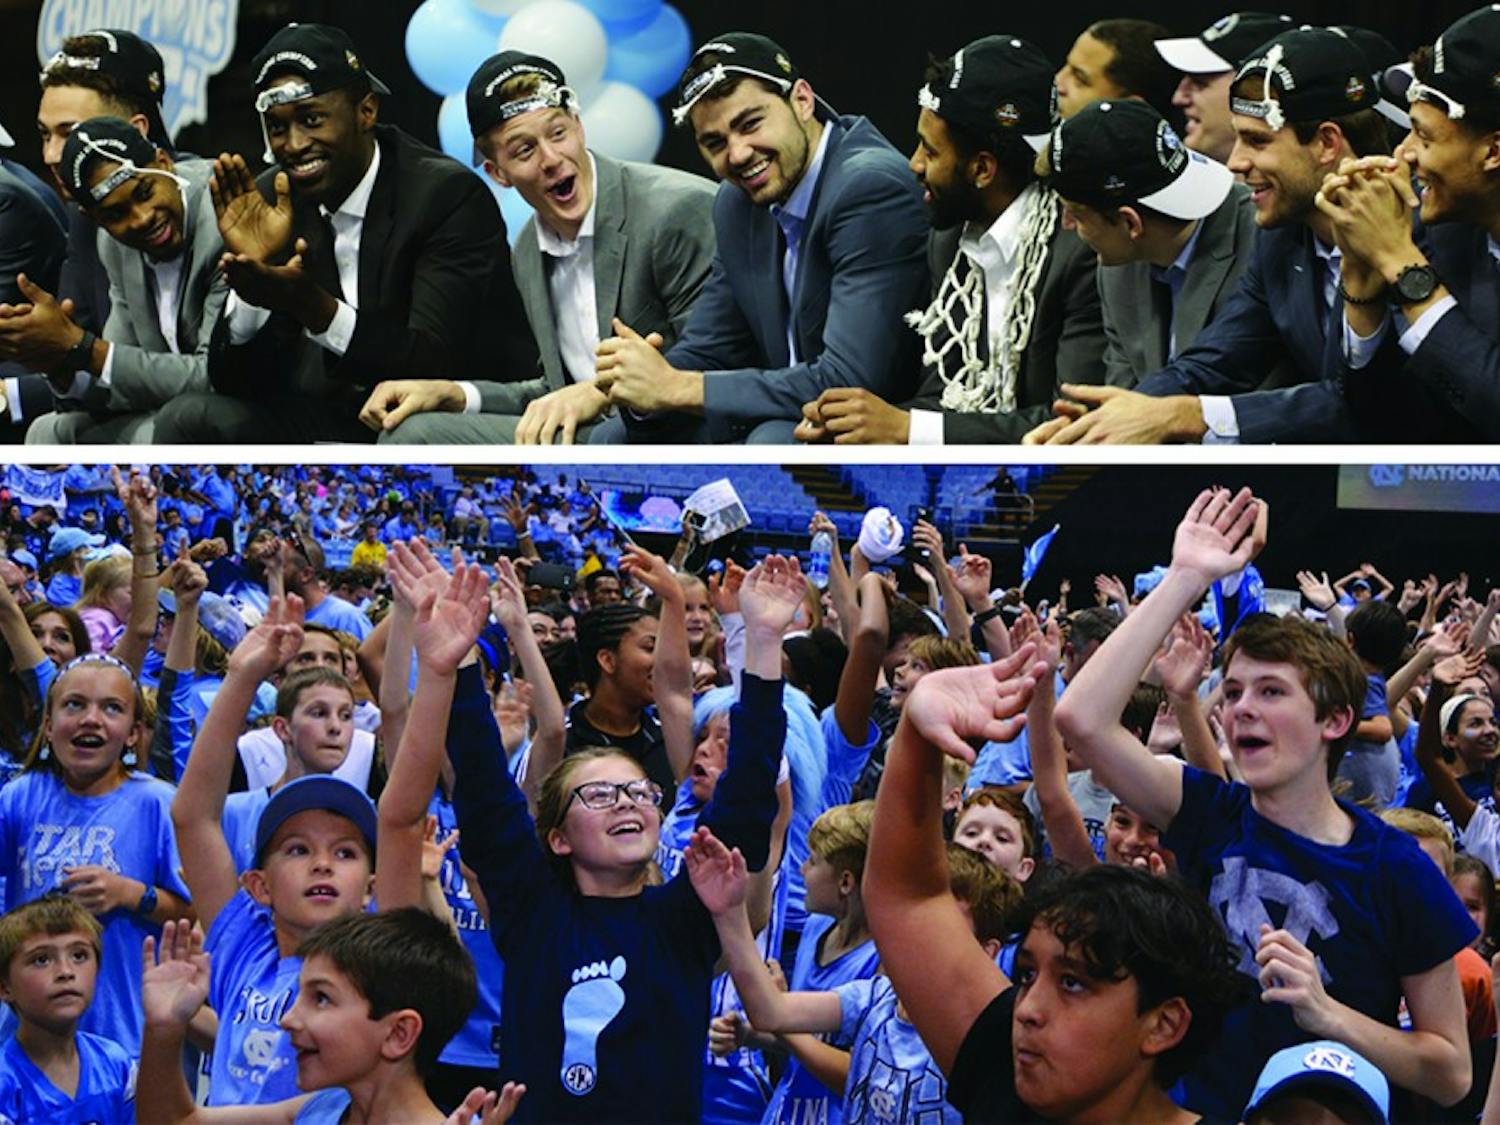 Thousands of fans welcomed the victorious UNC men’s basketball team back to Chapel Hill in the Smith Center Tuesday afternoon.